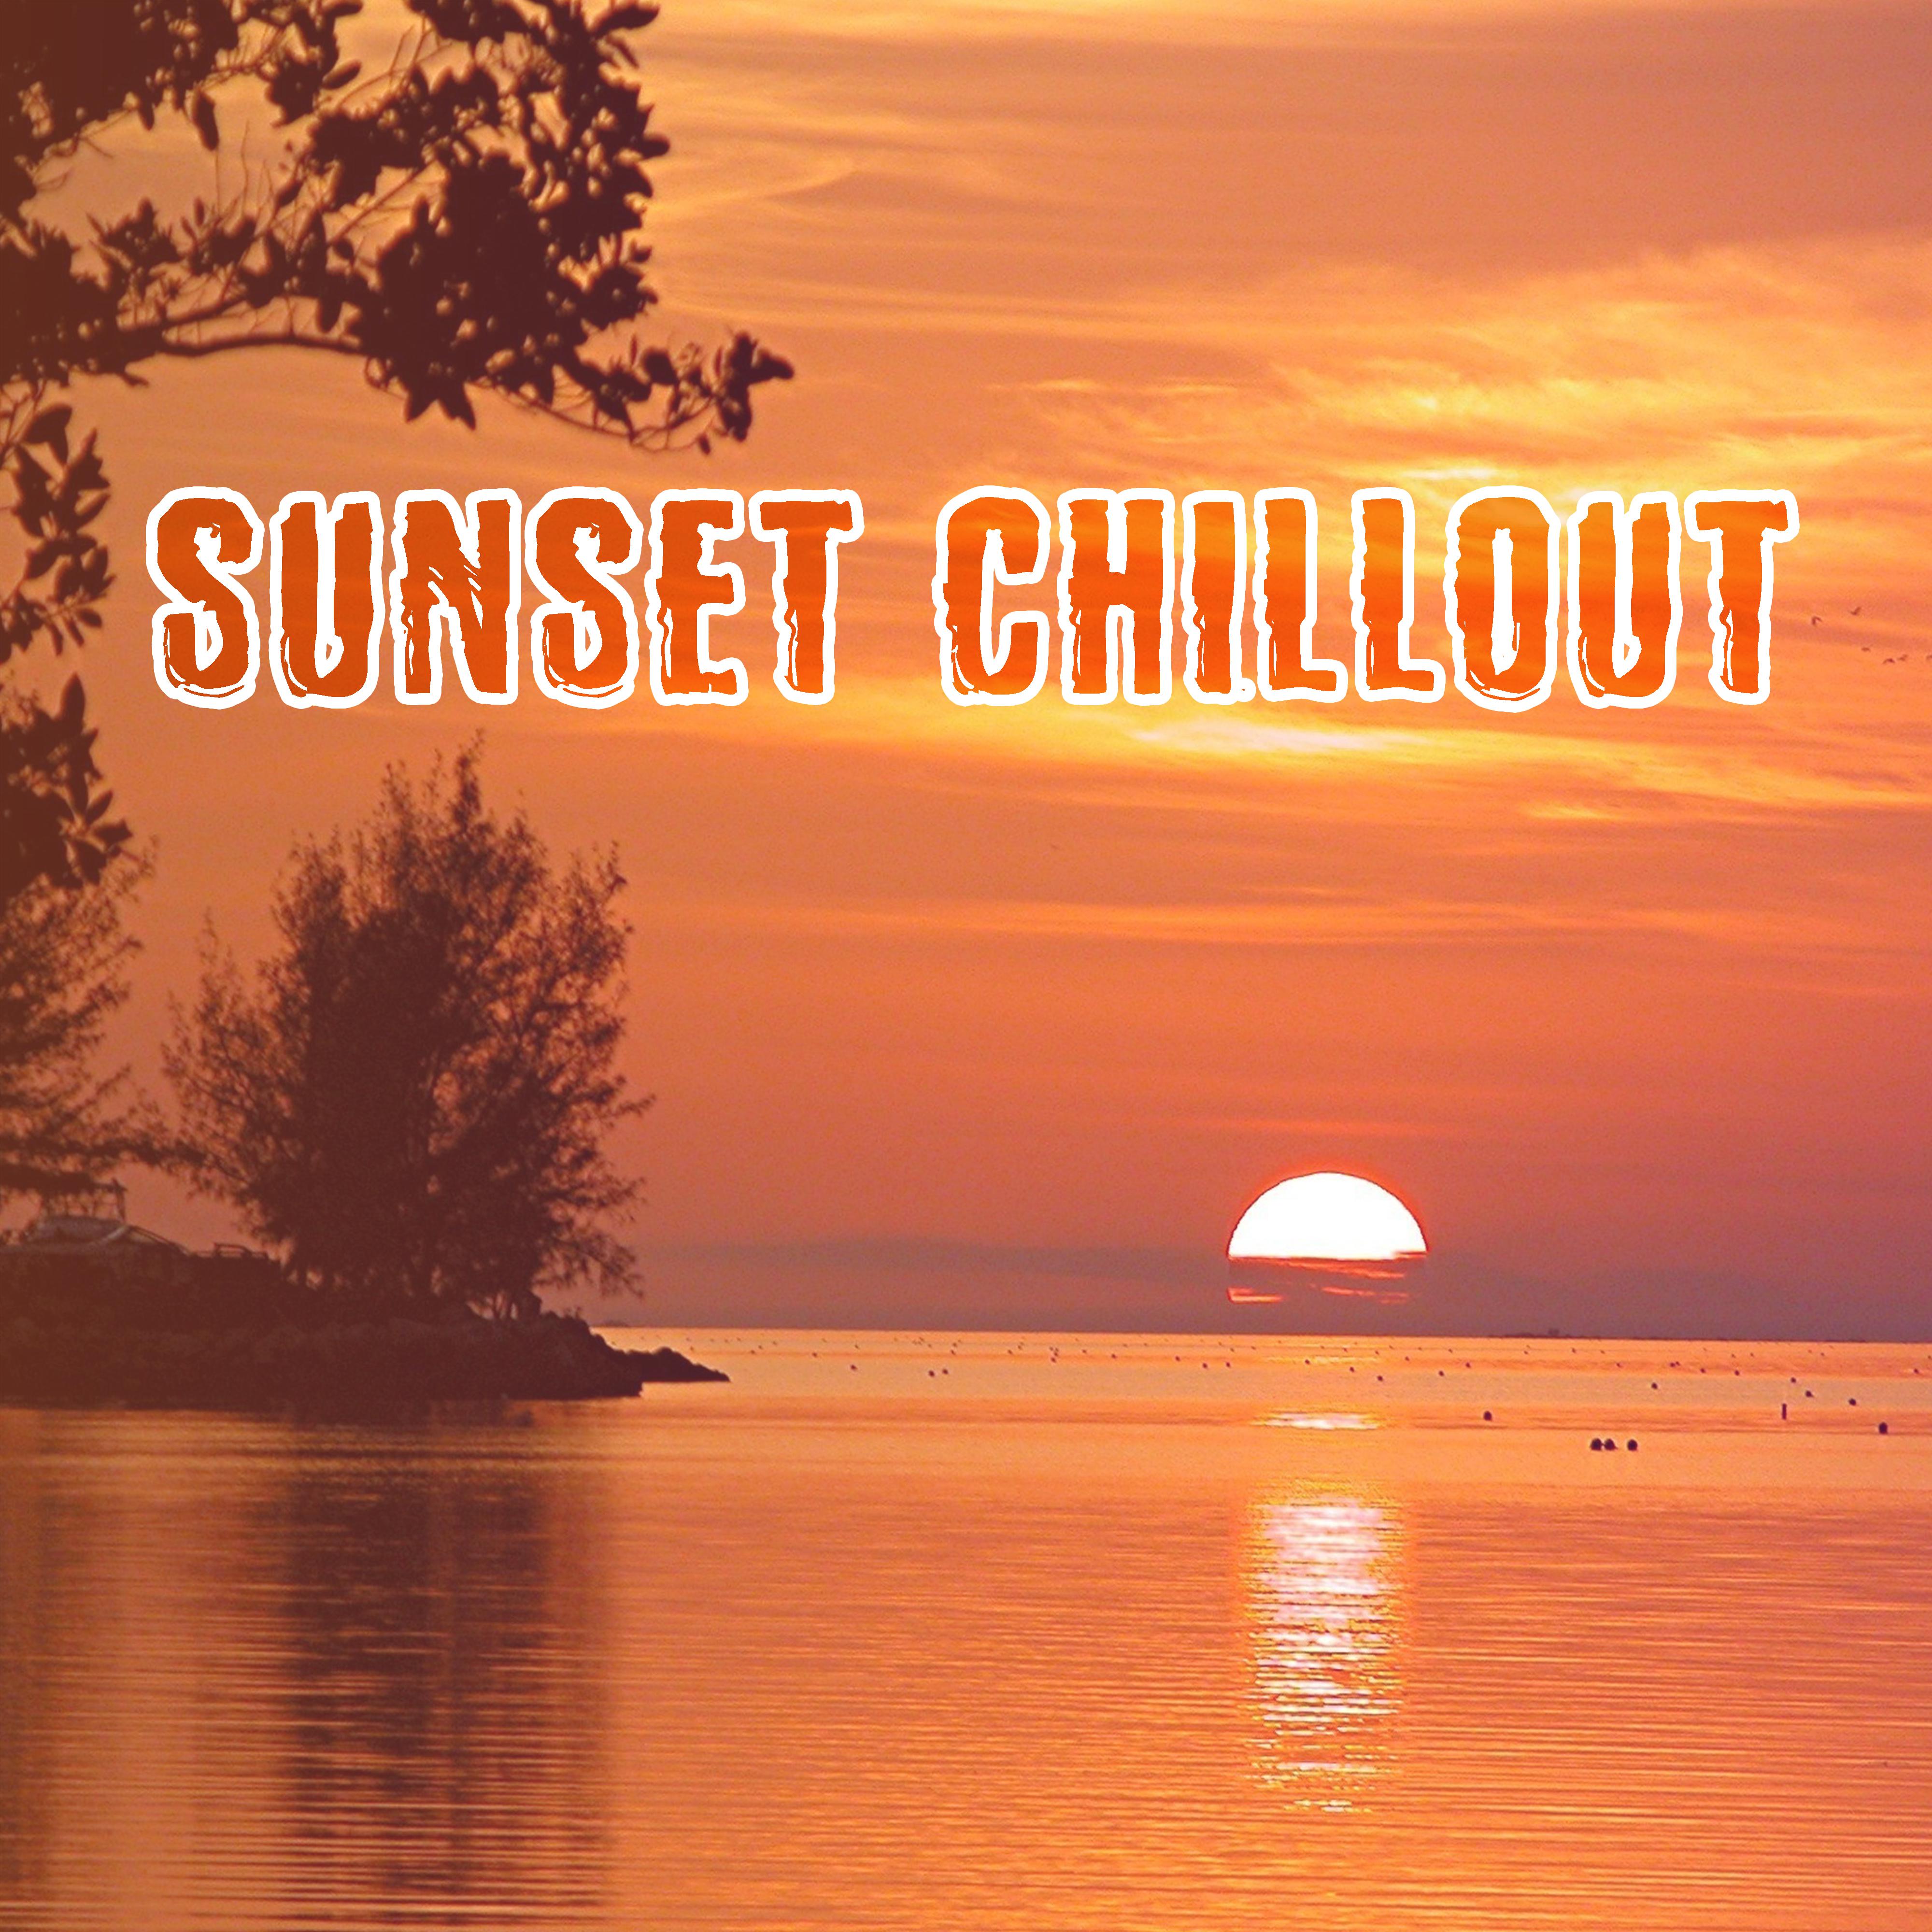 Sunset Chillout – **** Chillout Music, Relaxation, Summertime, Great Vibes